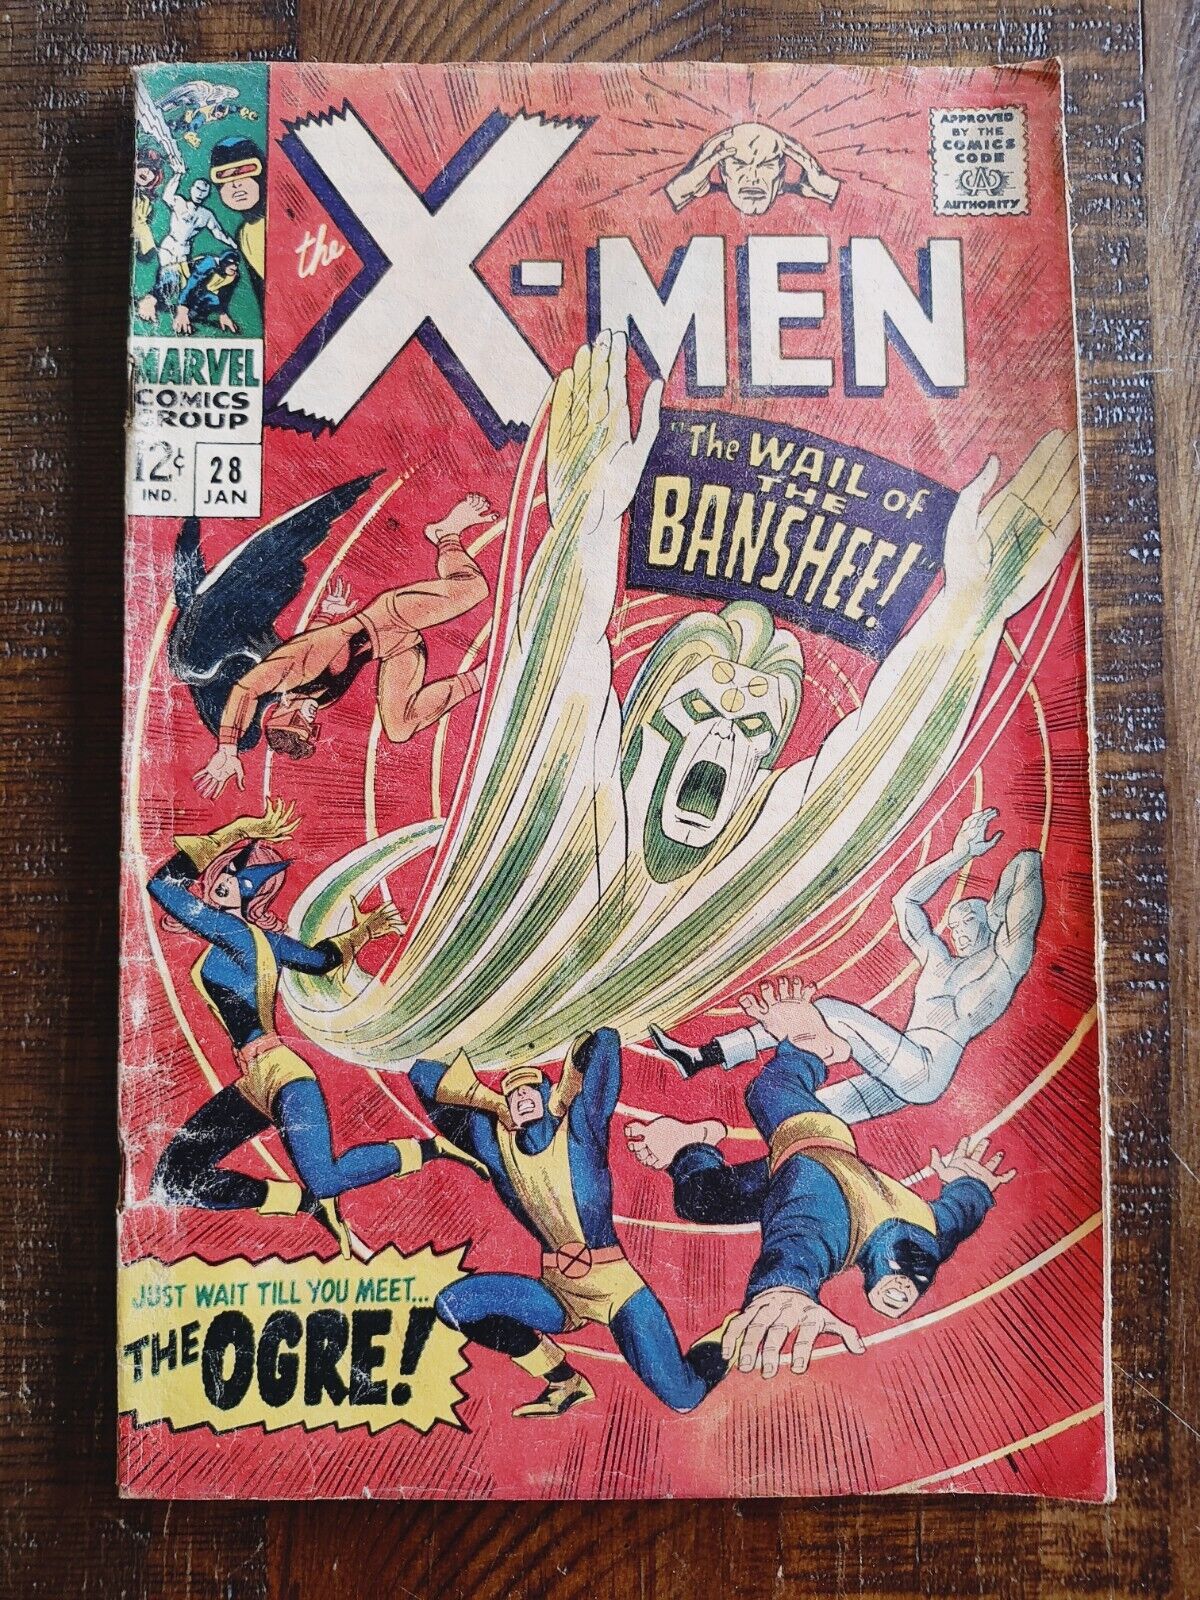  The X-Men #28 1967 KEY: 1st Appearance Banshee Very Good Condition Silver Age